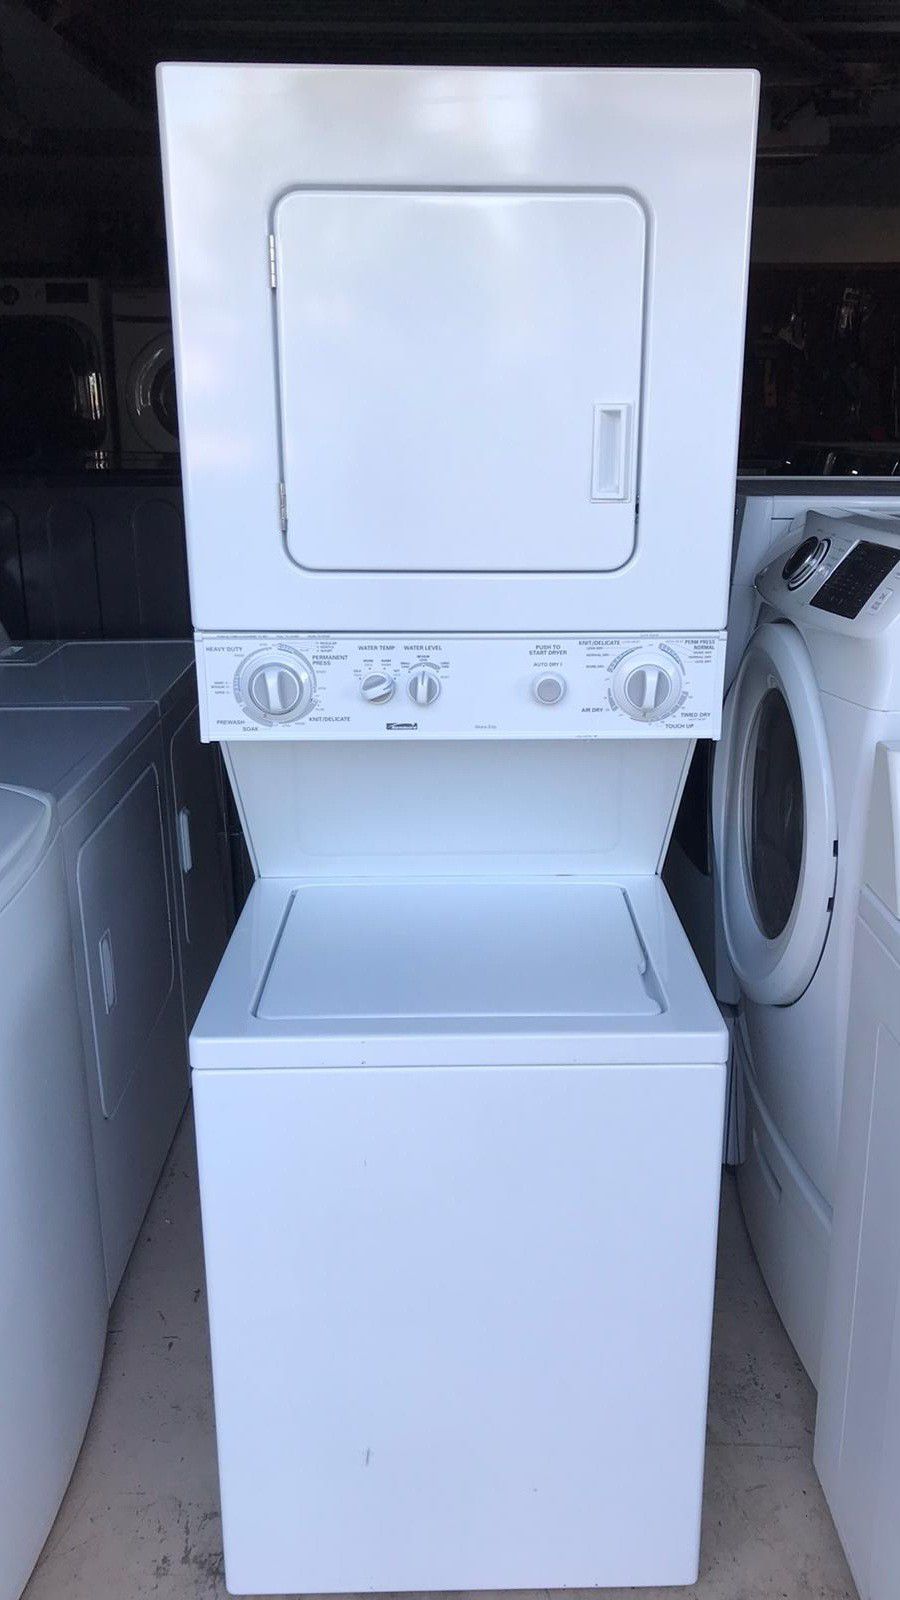 Clean Stacked Washer And Dryer 